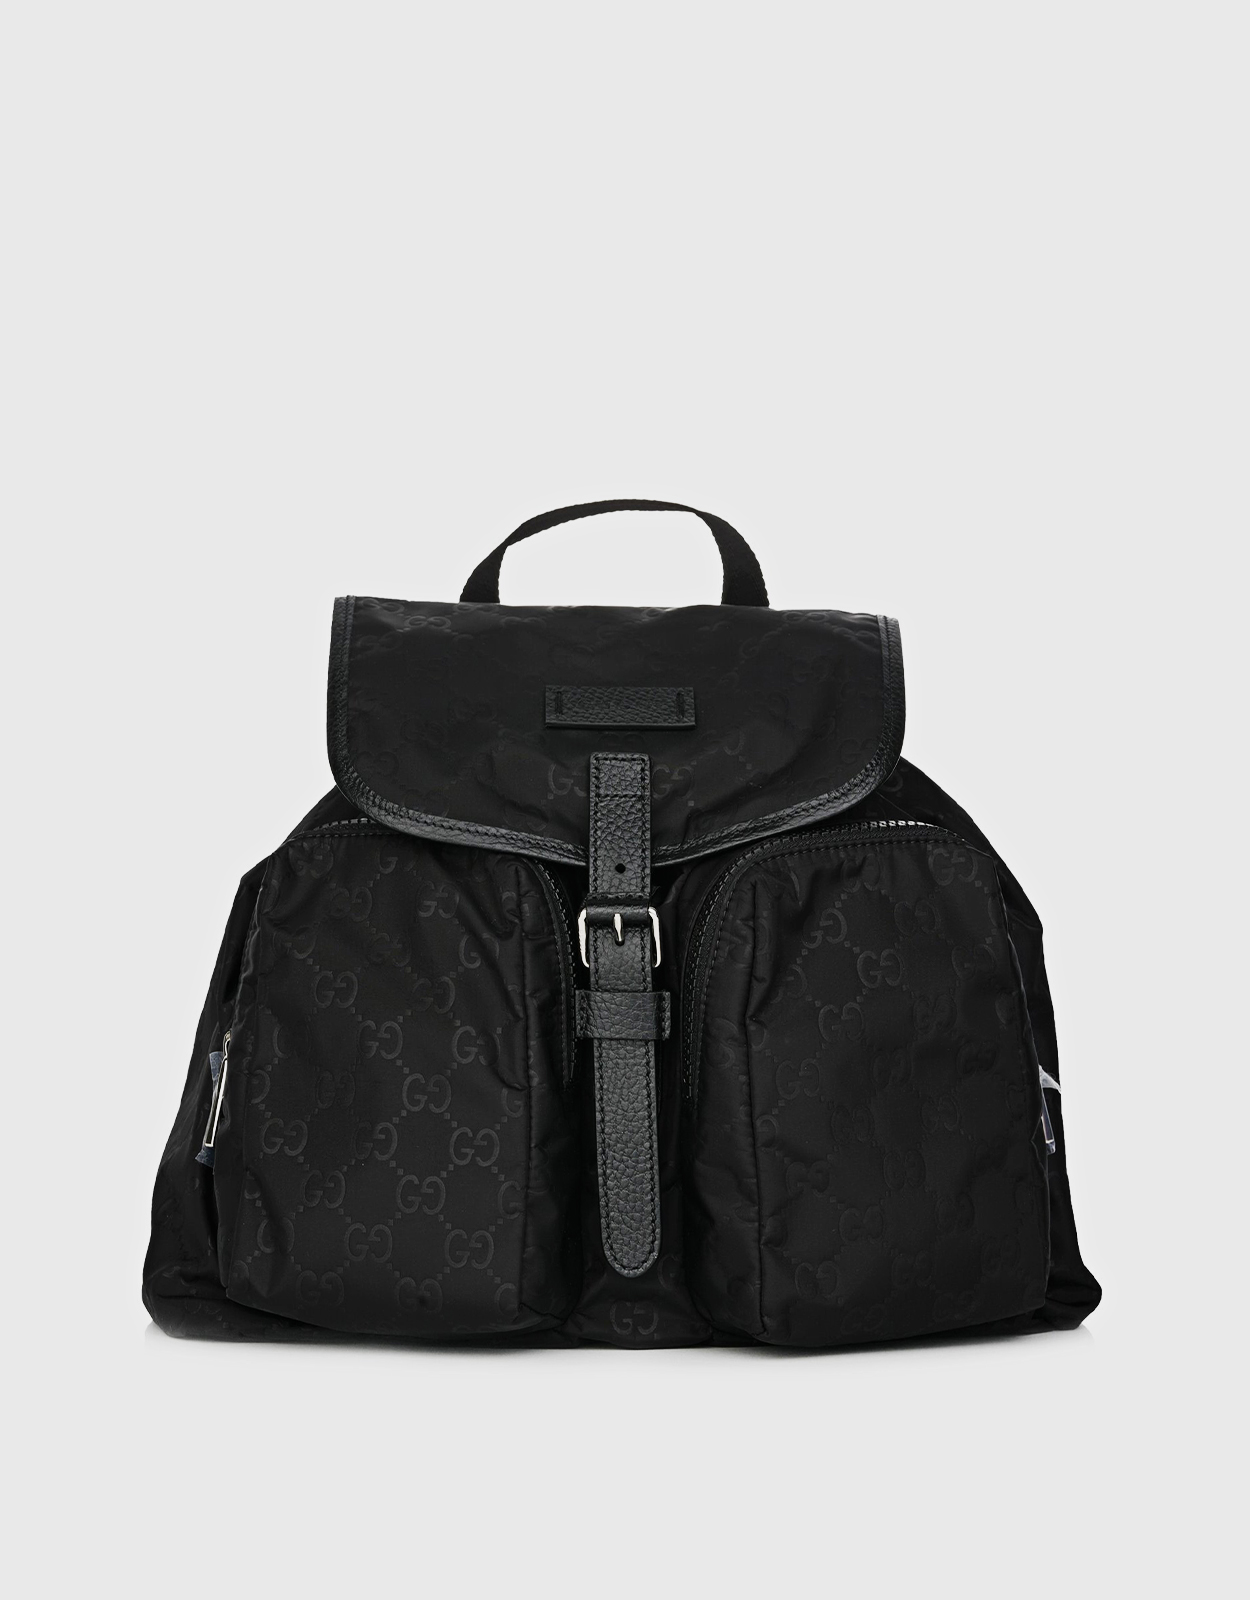 Gucci Black GG Nylon and Leather Rucksack Backpack Gucci